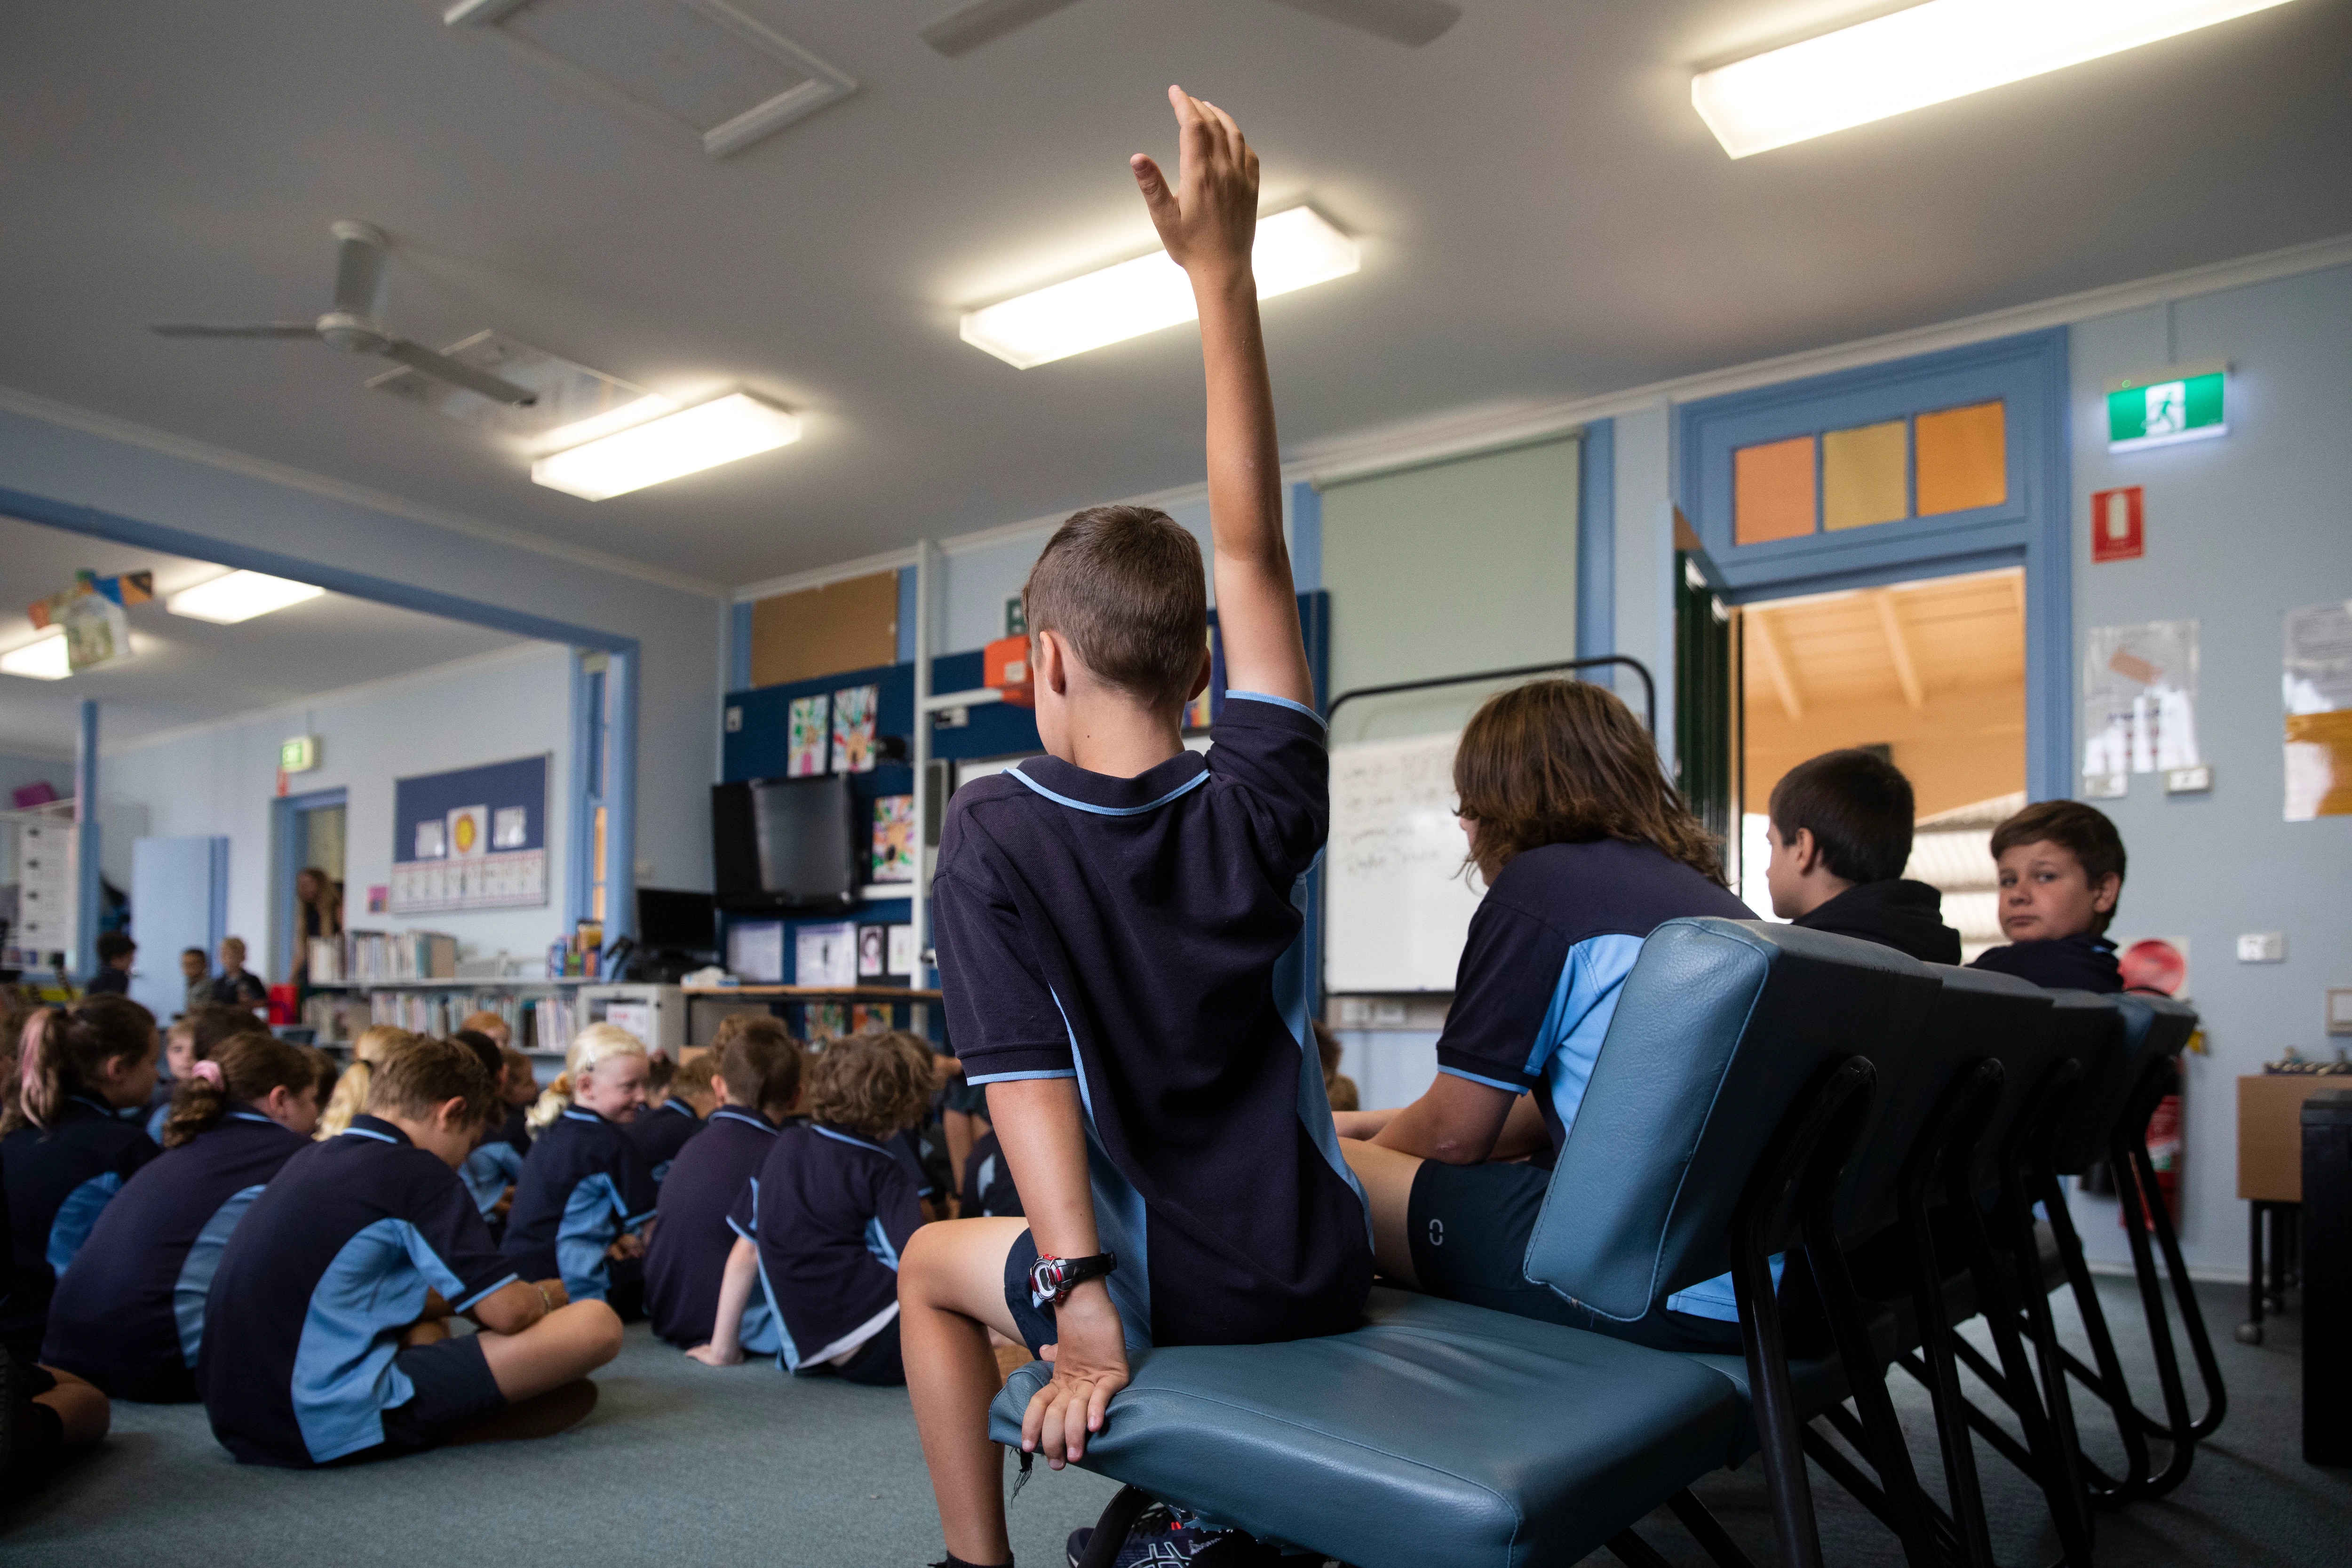 NSW kids and students will return to school from 25 May.